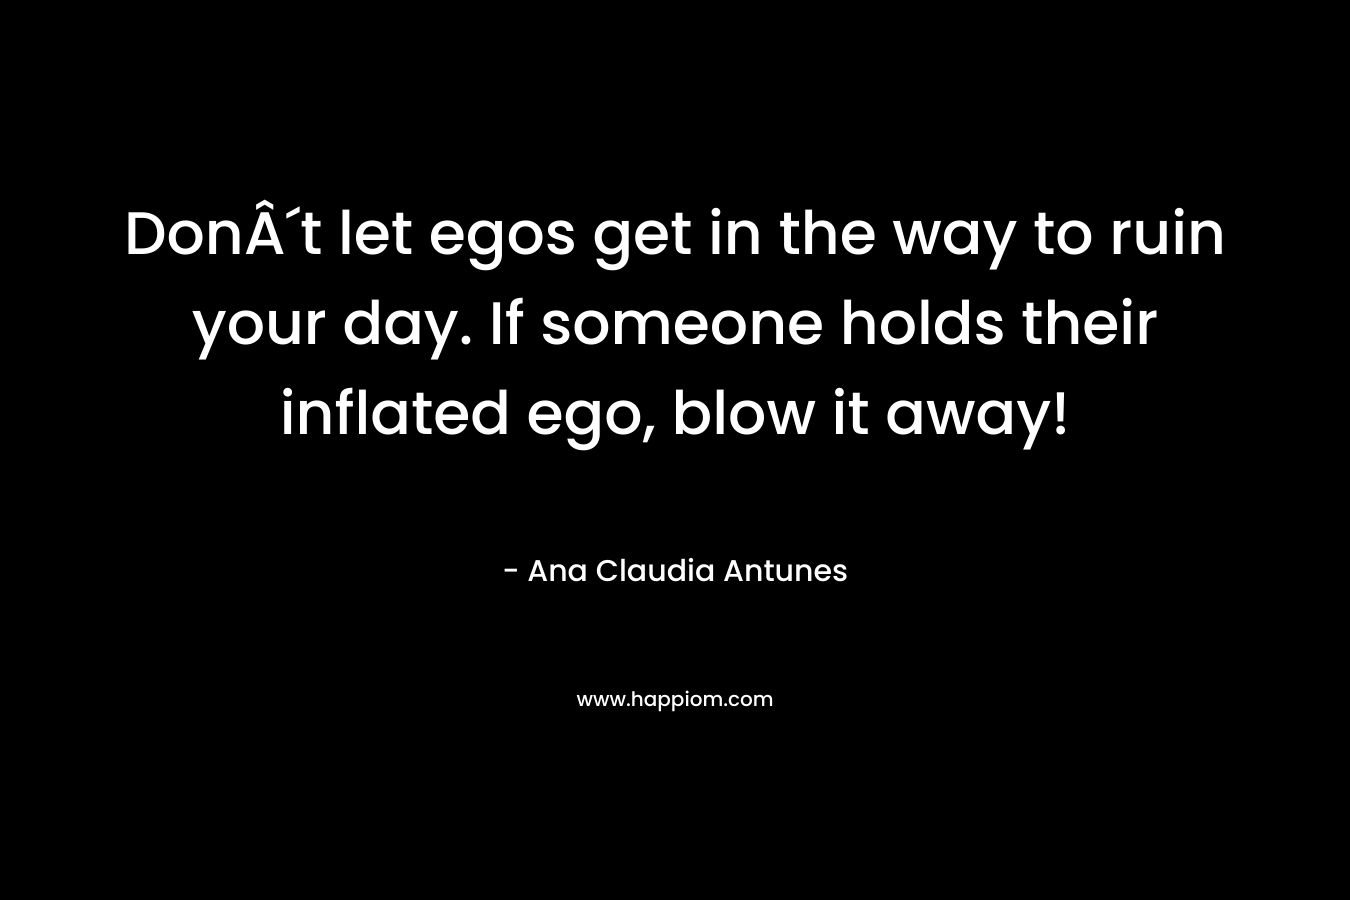 DonÂ´t let egos get in the way to ruin your day. If someone holds their inflated ego, blow it away!